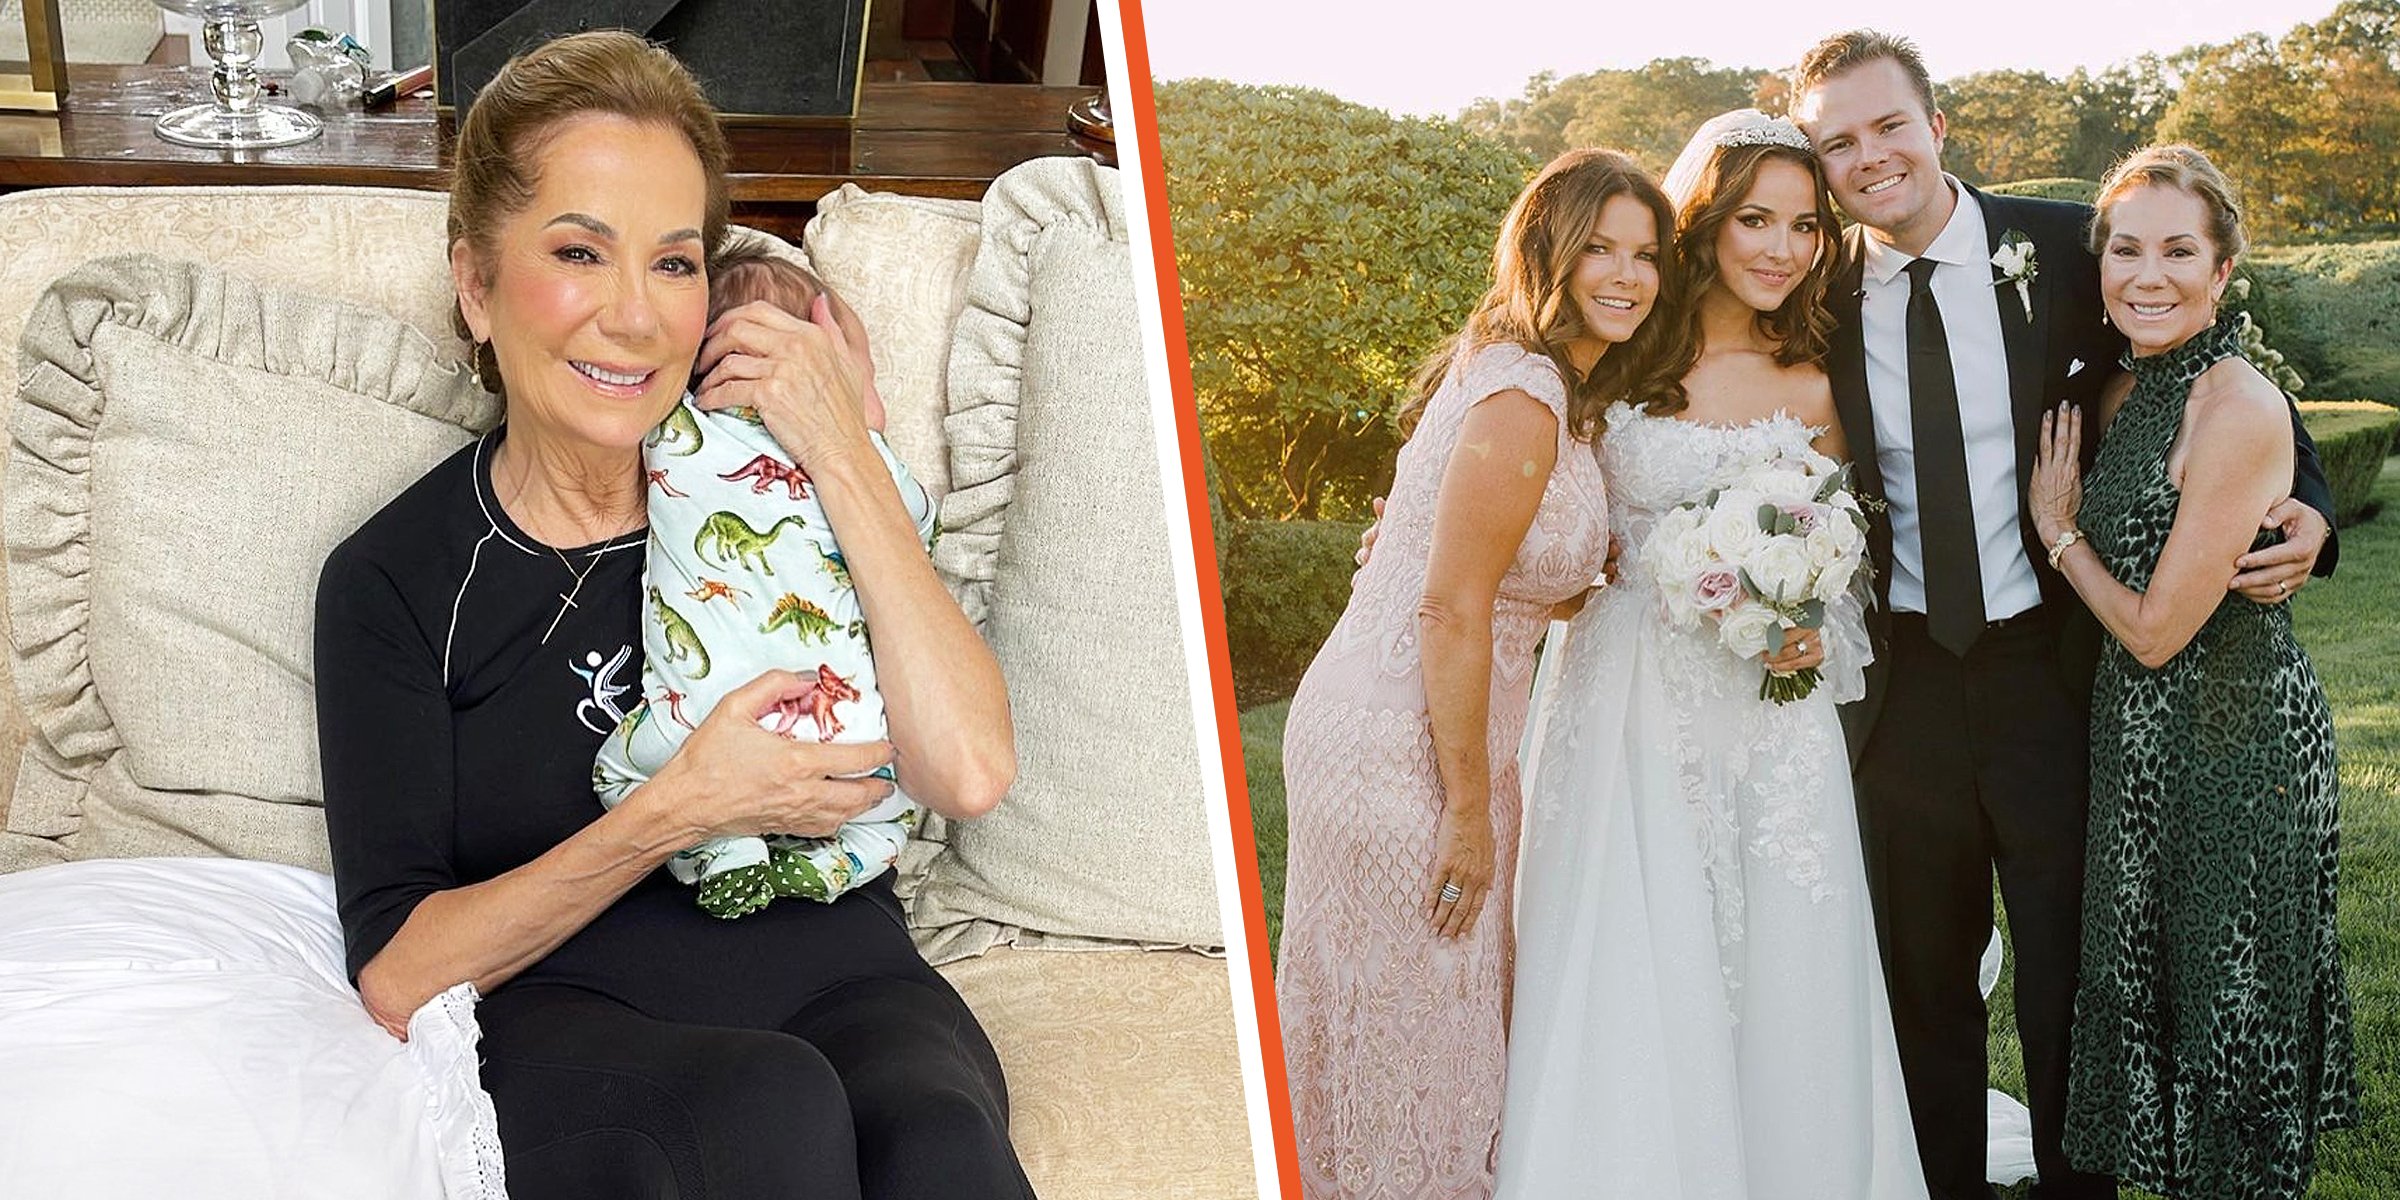 Widow Kathie Lee Gifford 'Stilled' Soul after Marrying off Kids within a  Year — Grandson Is Her 'Heaven' Now